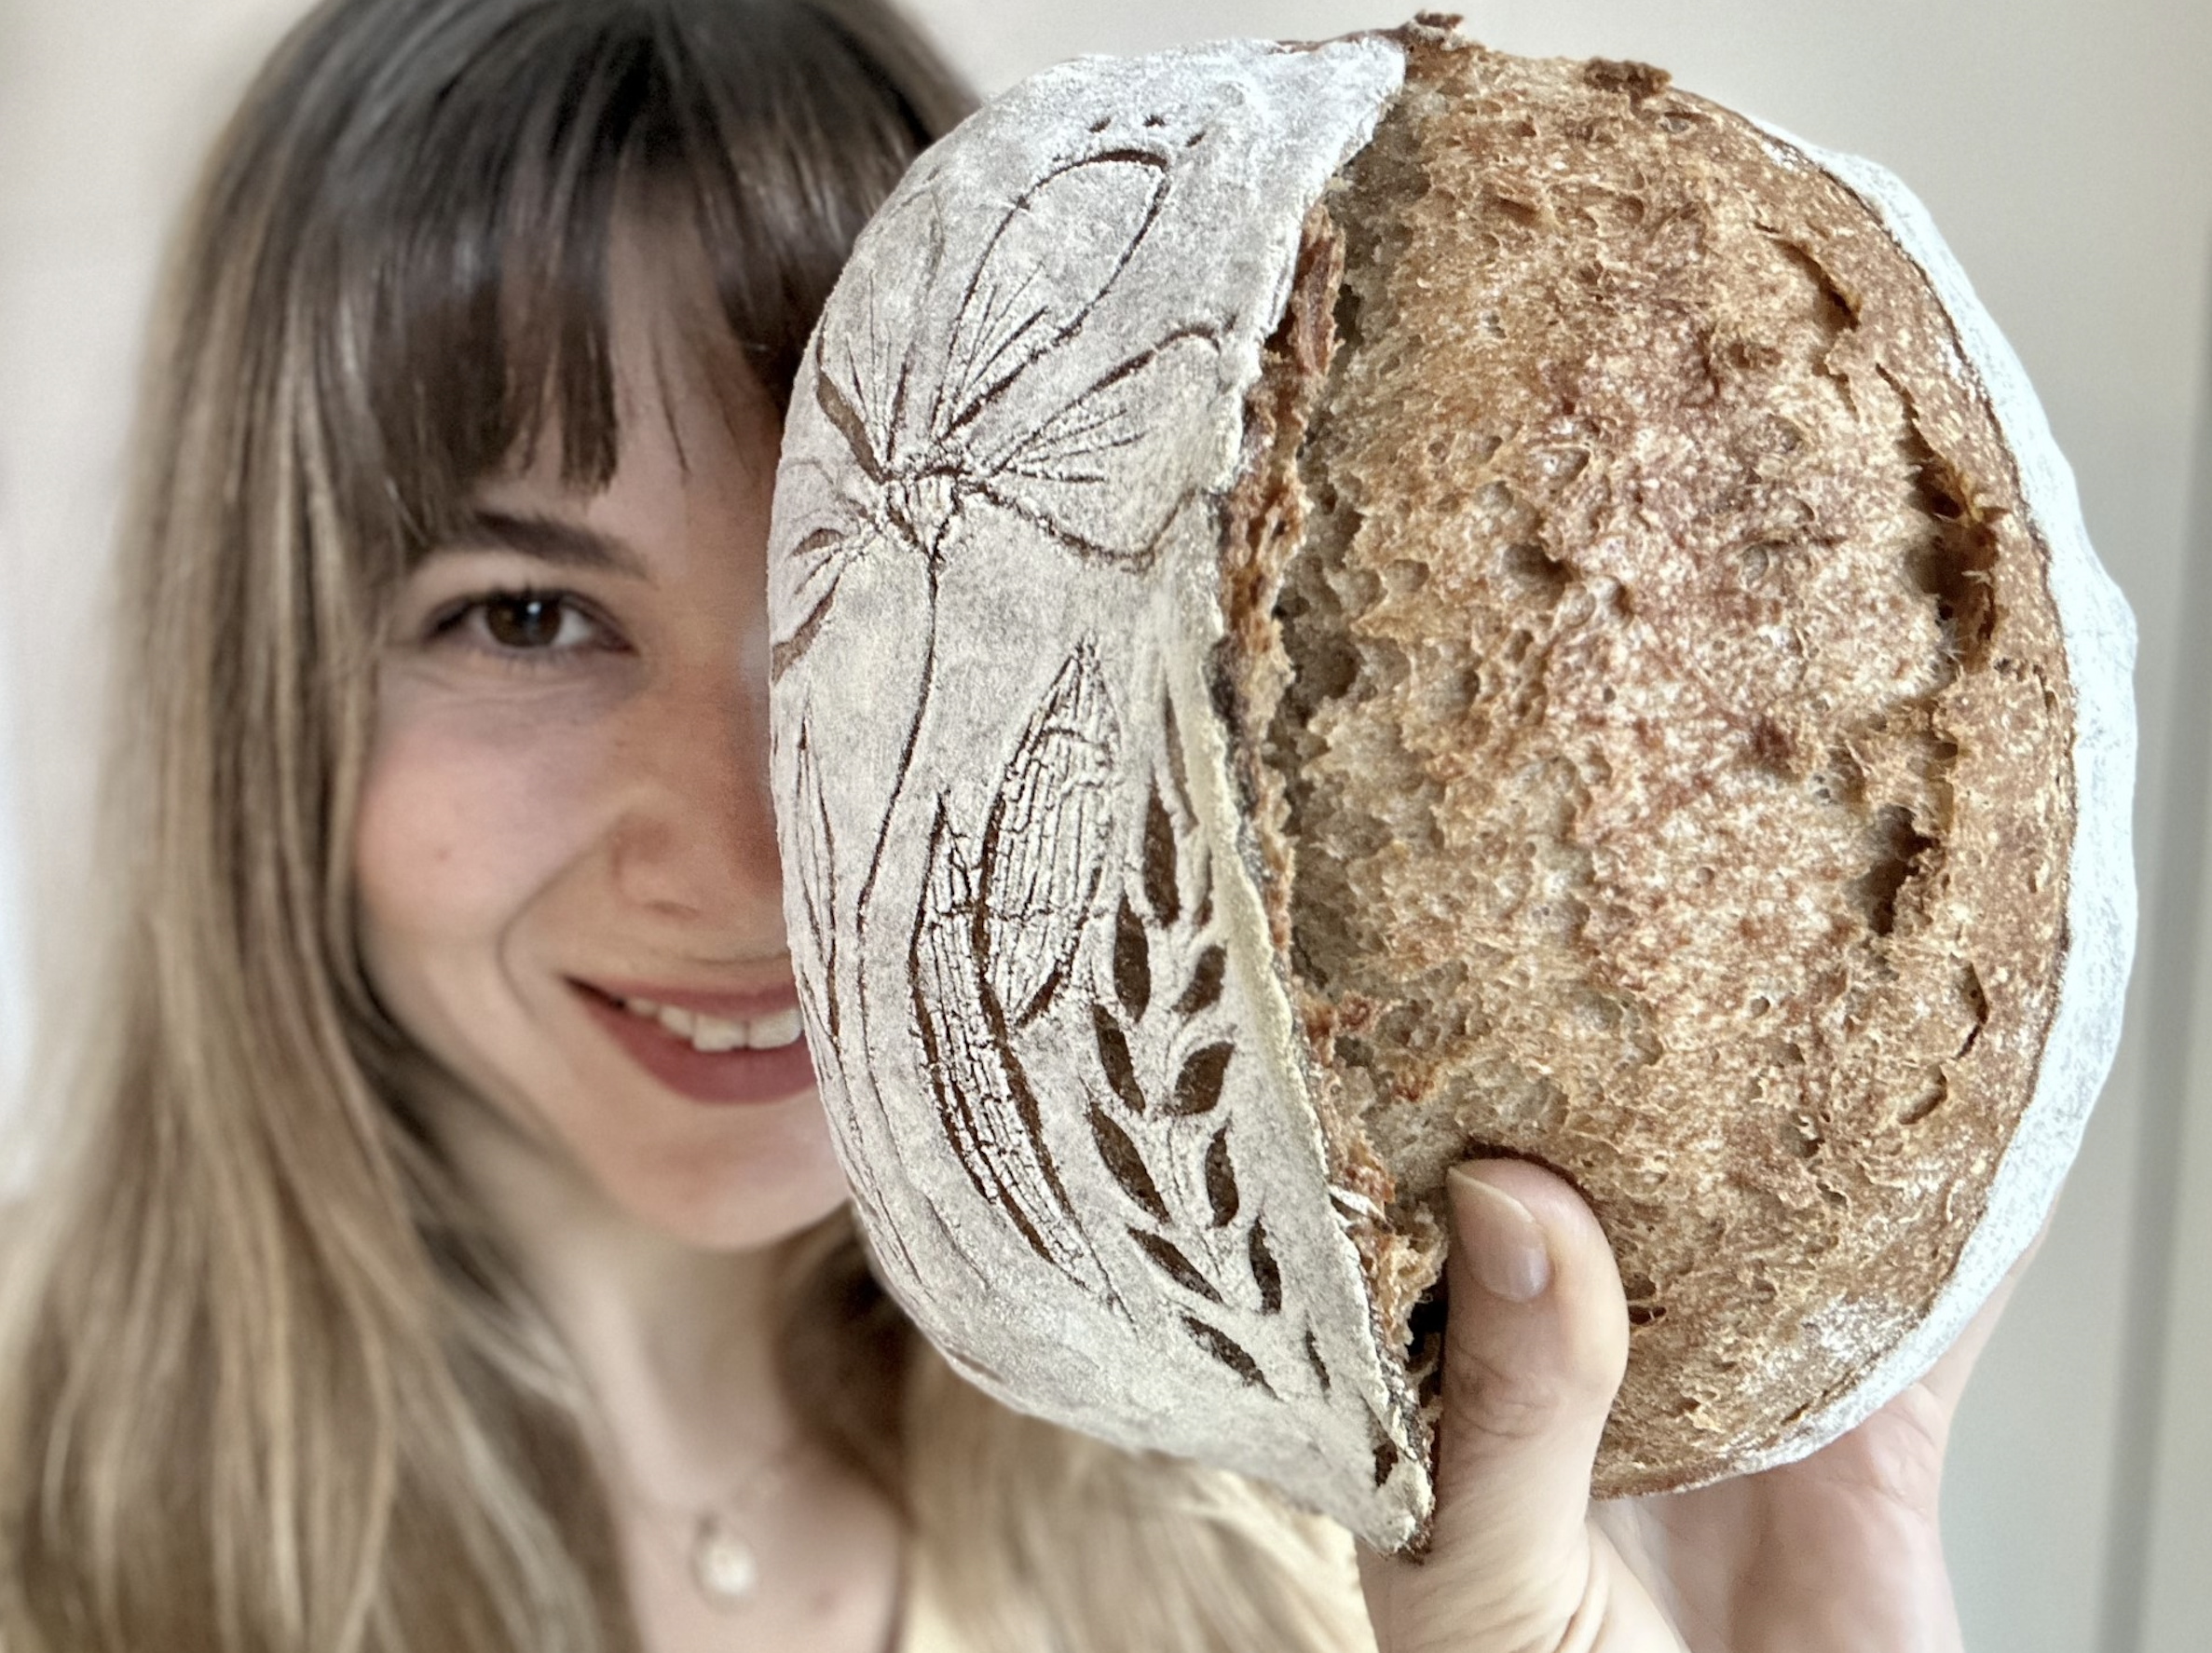 sourdough bread instagram social media influencer content creator on vancouver island in british columbia canada Jaimie from @TheSourdoughFlourist